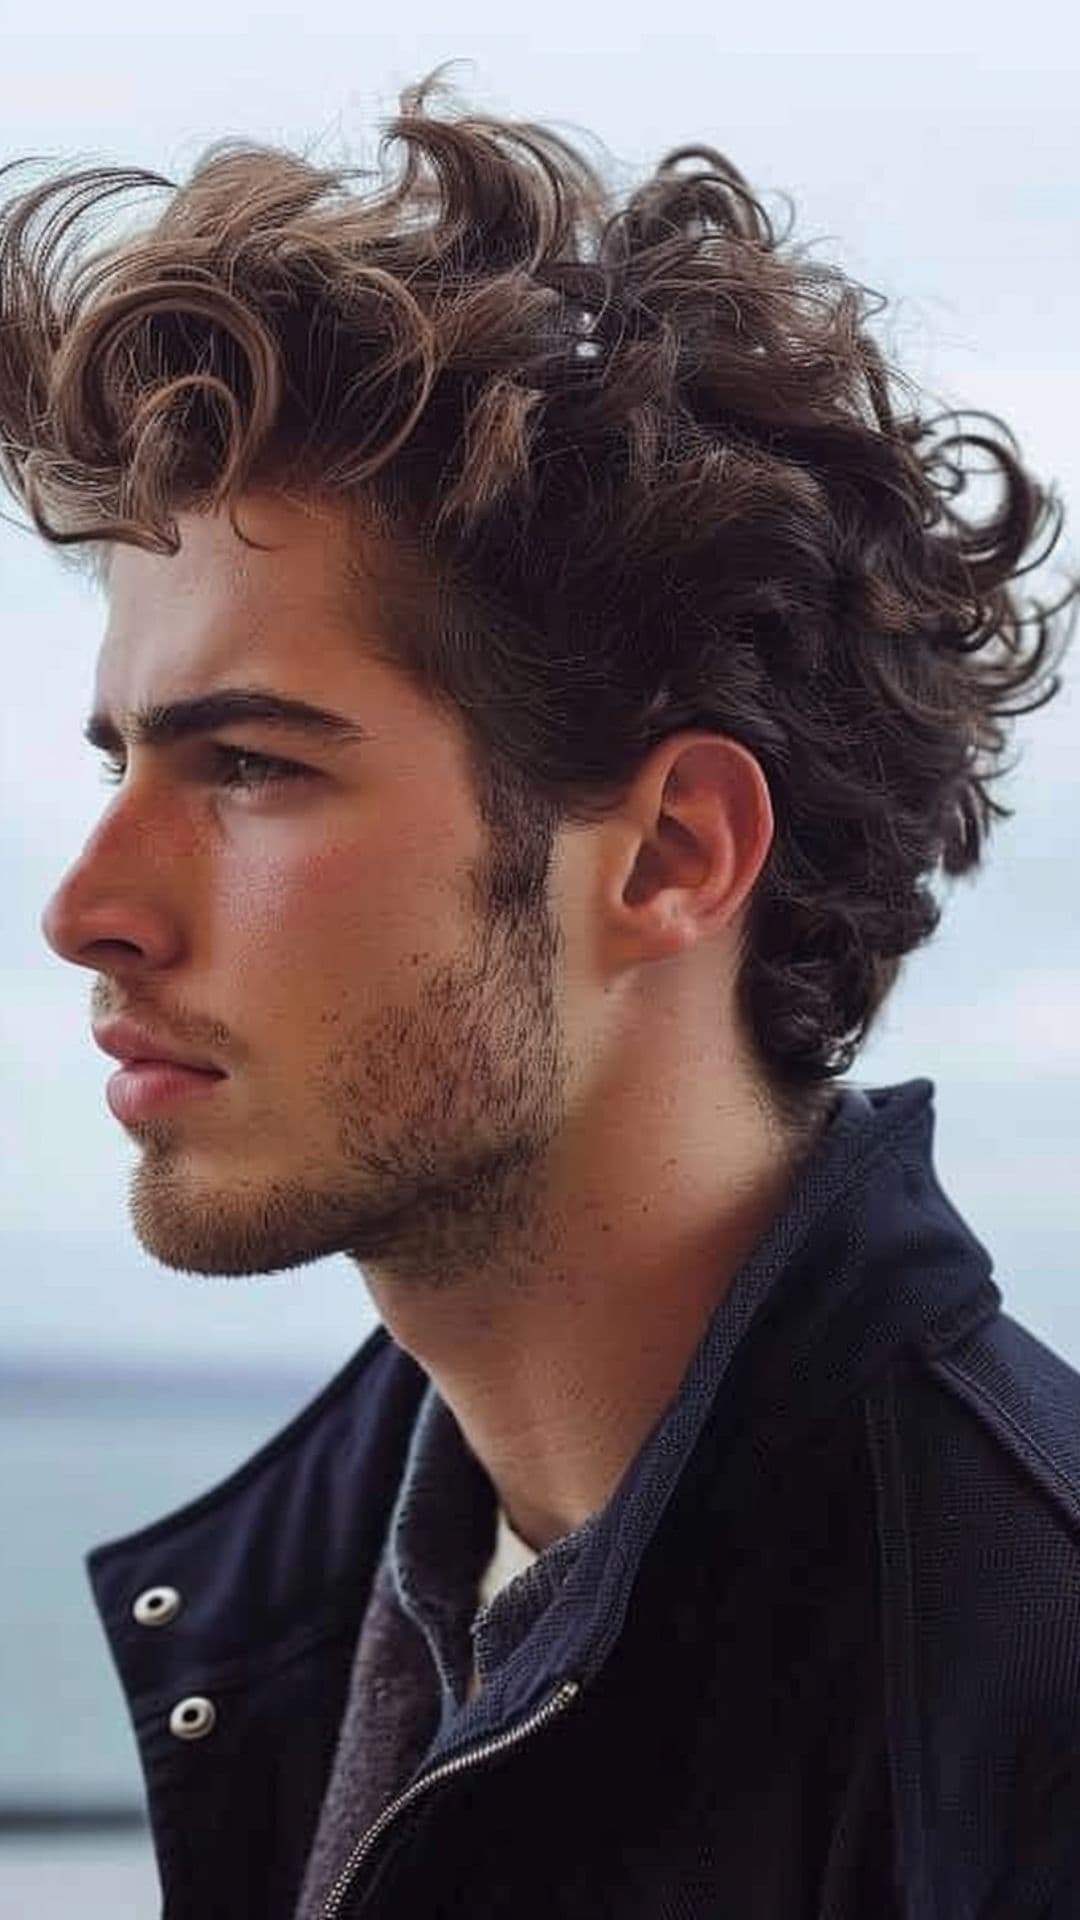 A man modelling a curly quiff hairstyle.